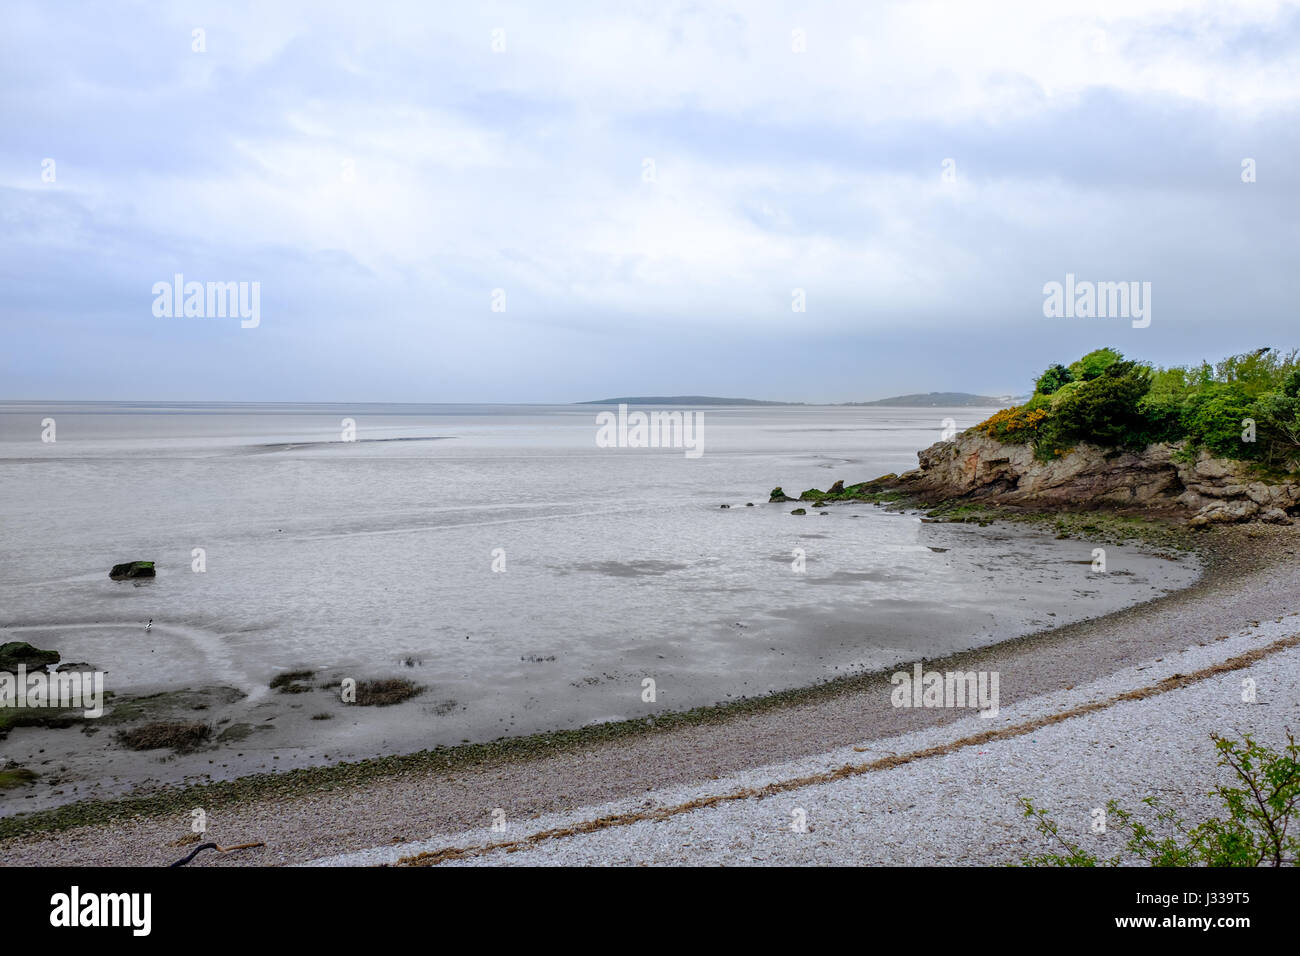 Cloudy day with the tide out at Morecambe Bay on the mud flats along the shore of Warton Sands, Far Arnside, Silverdale, Lancashire, England. Stock Photo